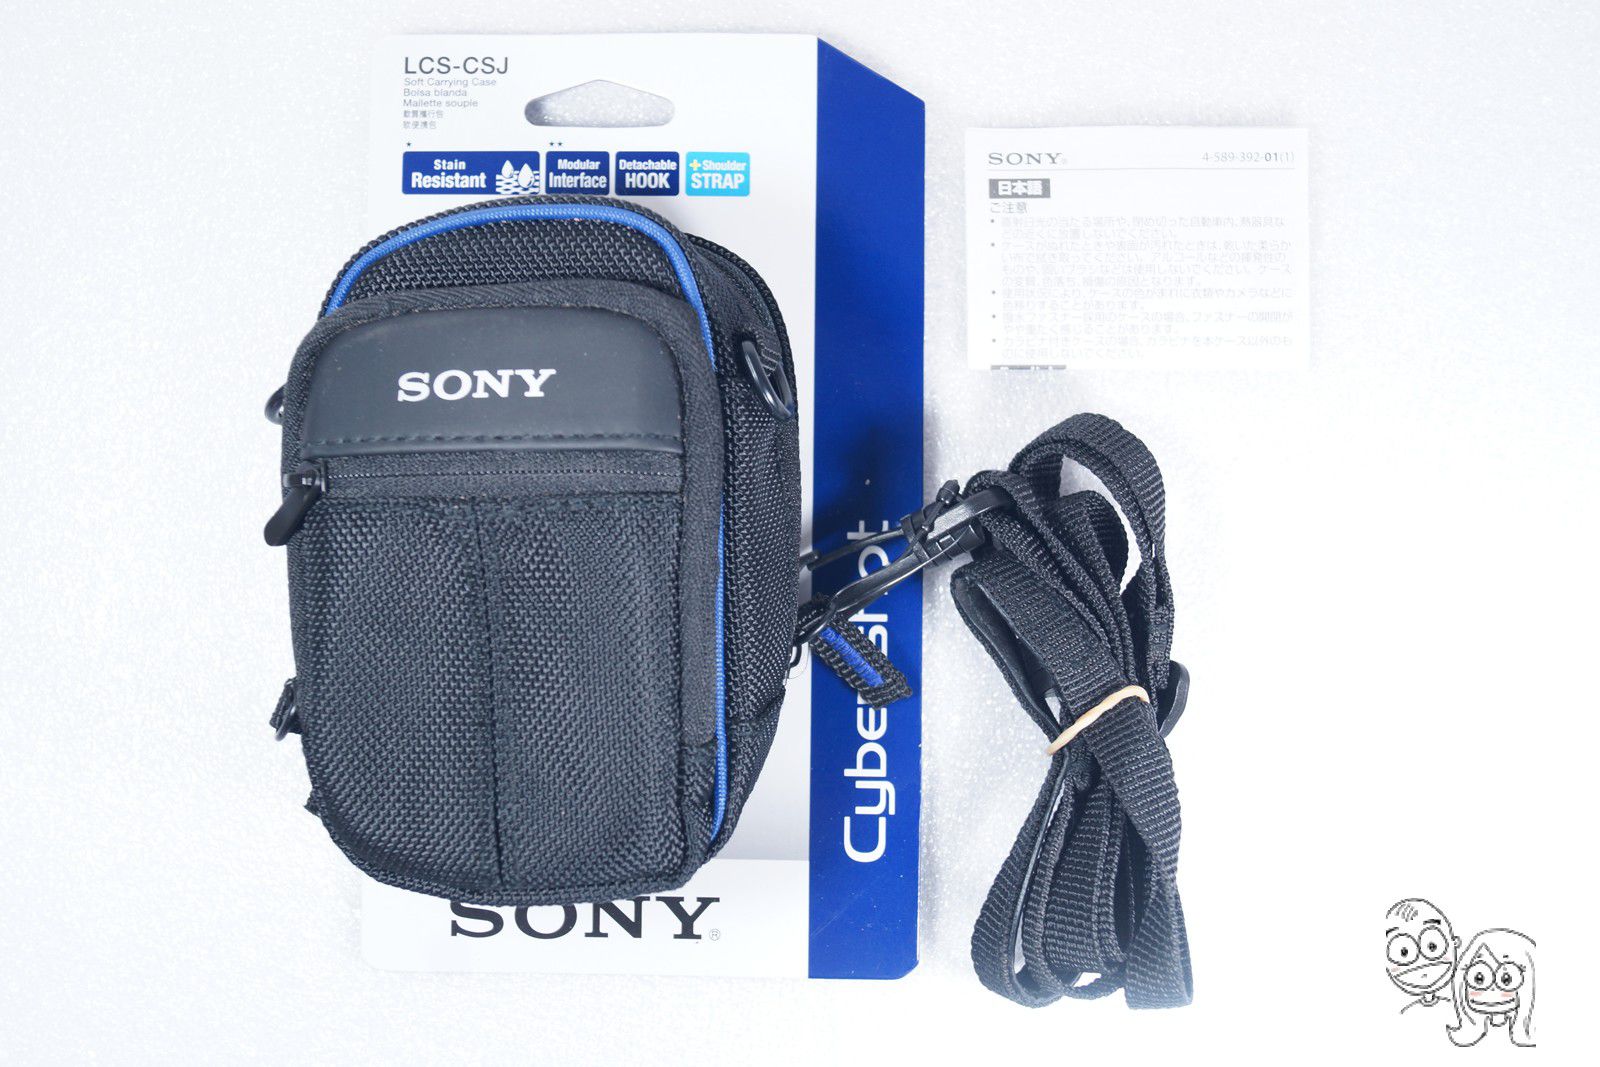 NEW Sony - LCS-CSJ - Soft Carrying Case for Sony DSC-S/W/T/N Series Cameras BLK